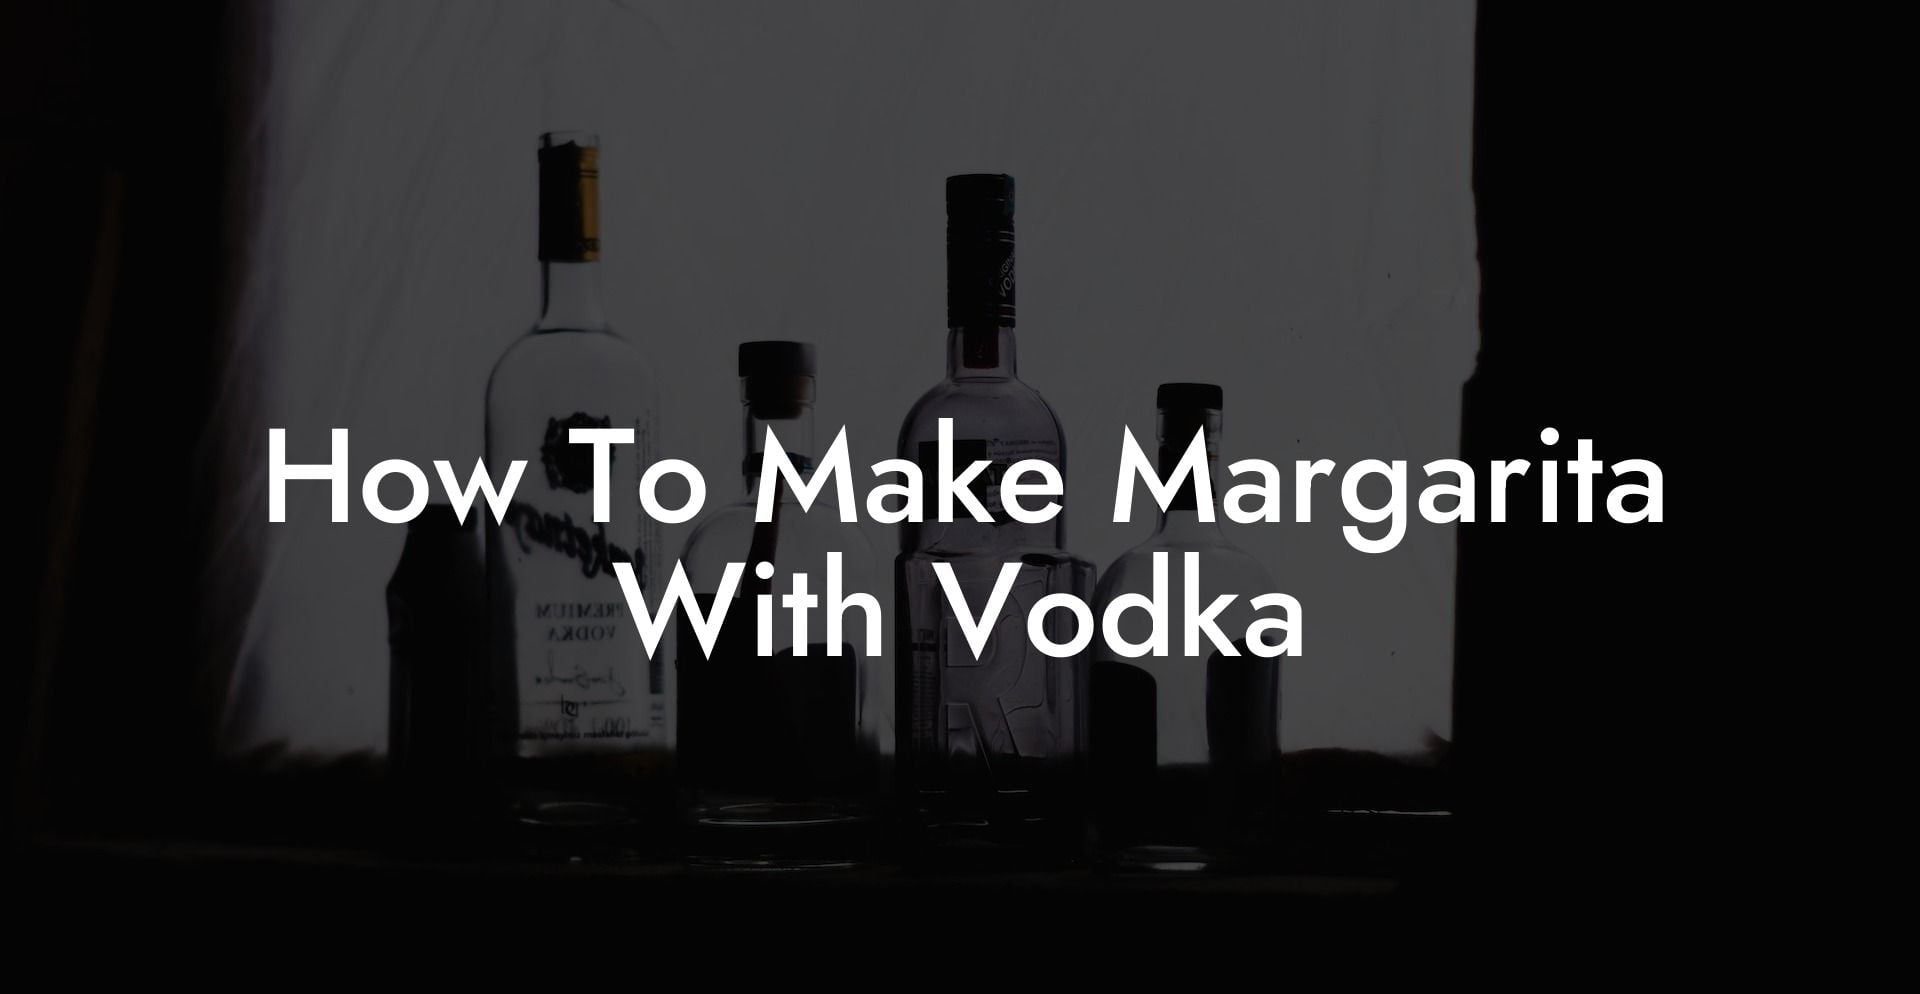 How To Make Margarita With Vodka